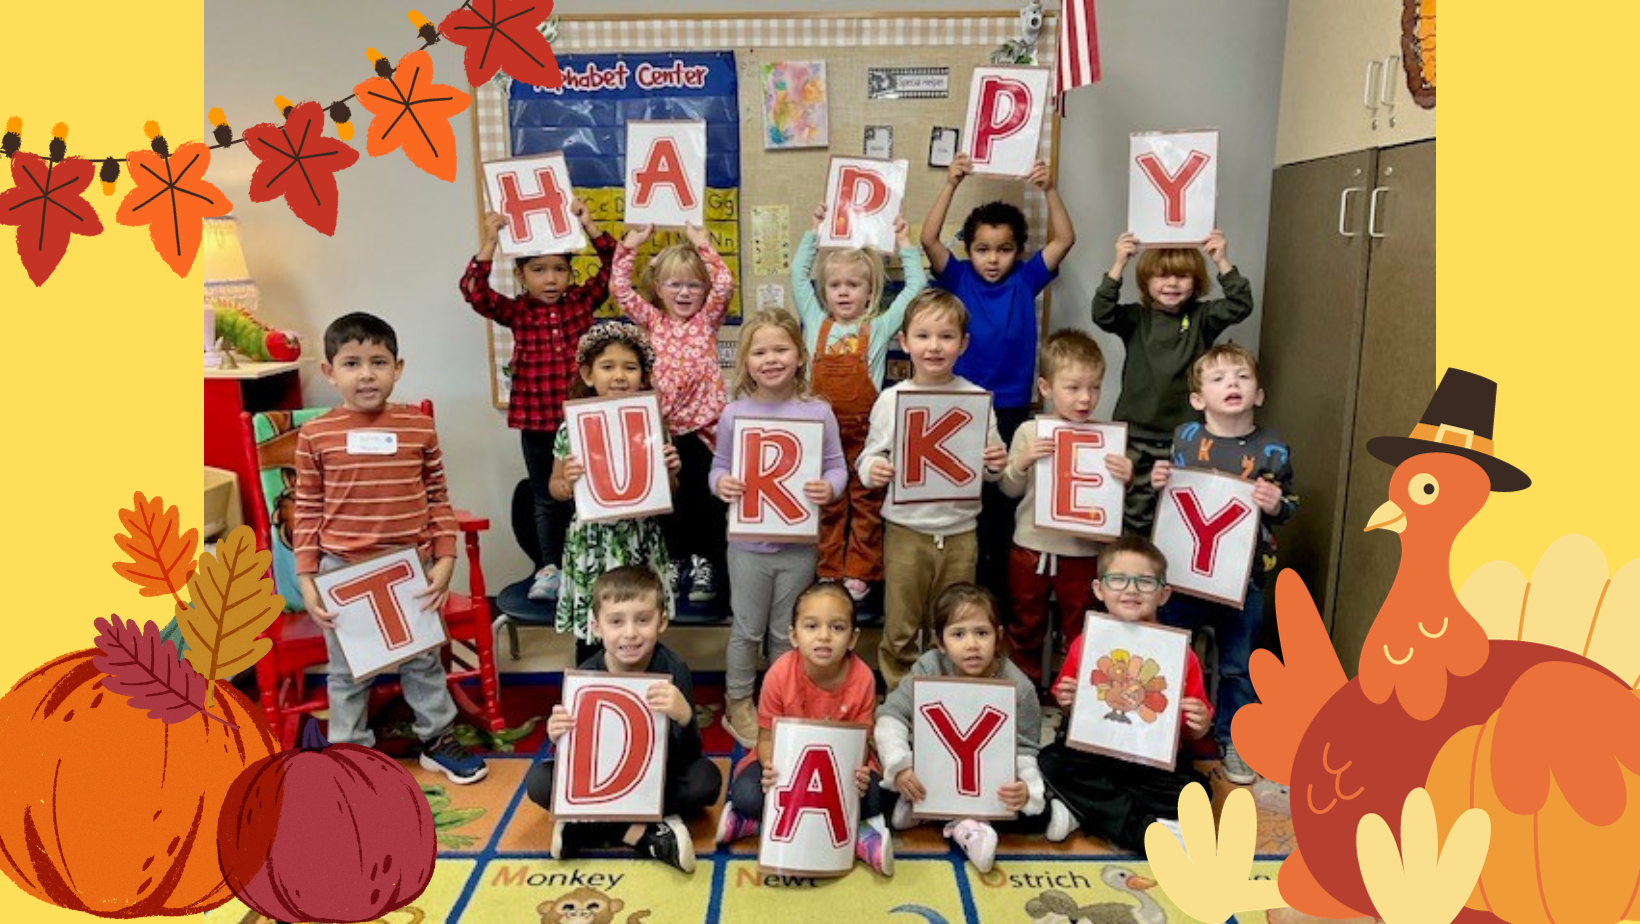 young children holding up signs that read "happy turkey day"